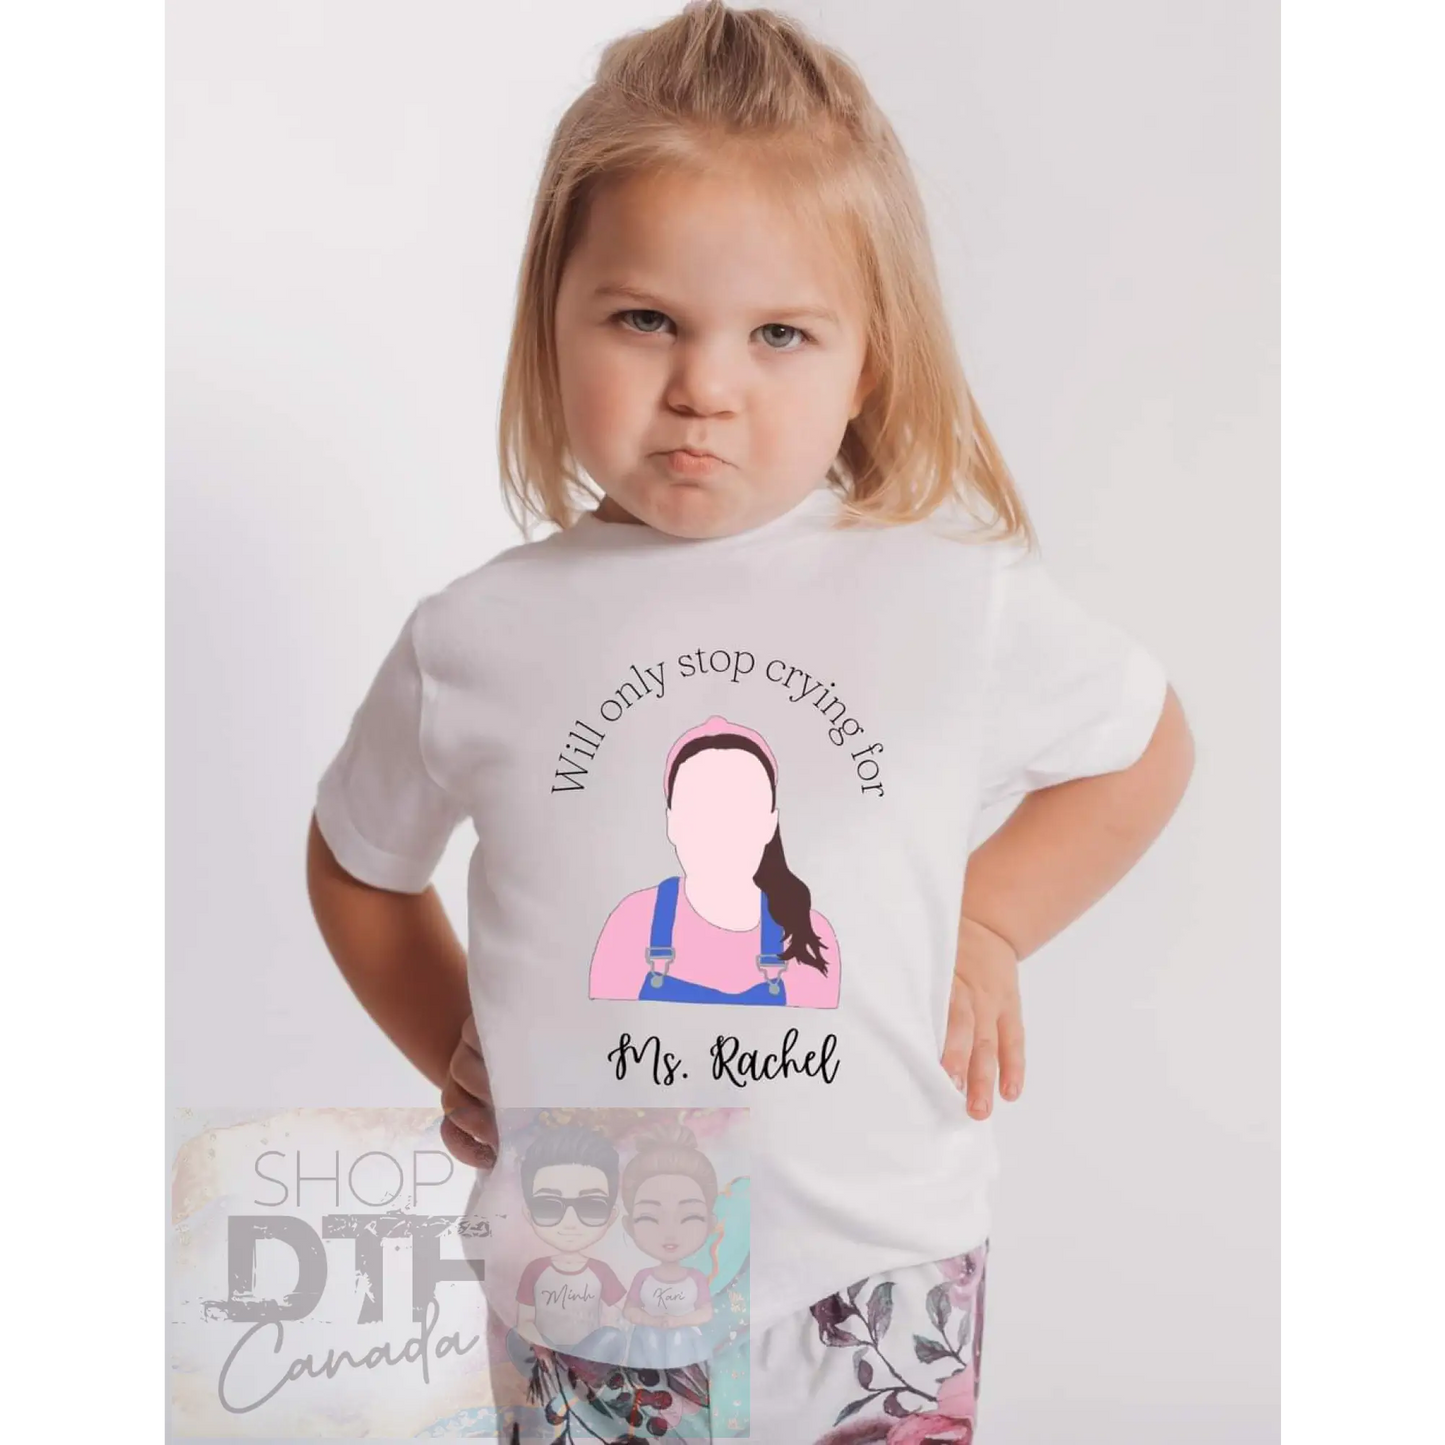 Kids - Stop crying for Ms Rachel - Shirts & Tops